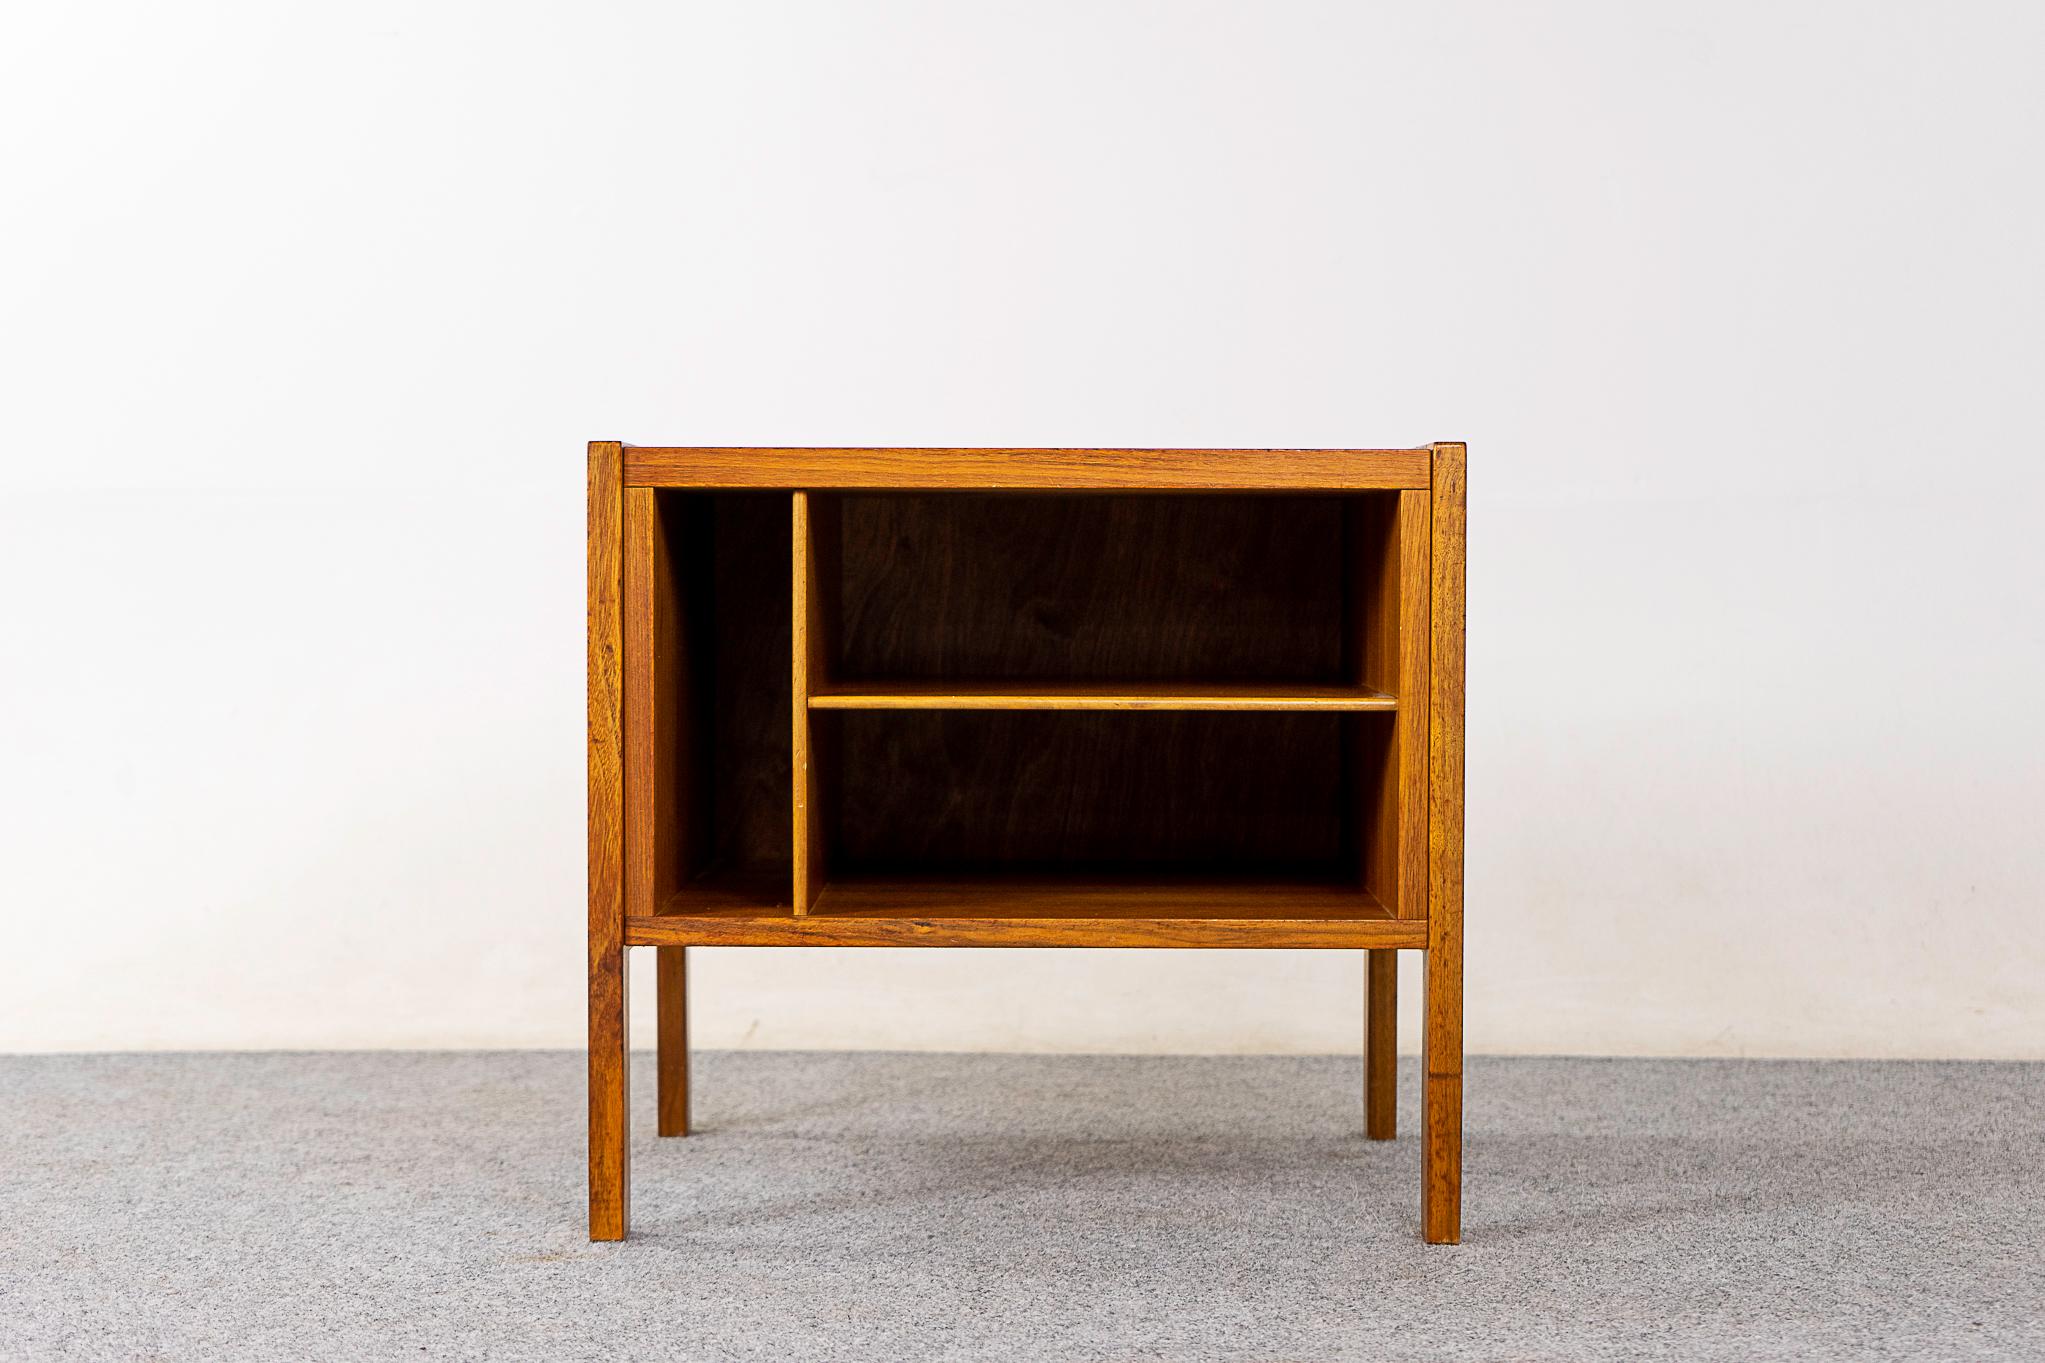 Walnut Danish bedside, circa 1960's. Veneered case with solid robust legs. Divided open cubby, get organized! 

Please inquire for remote and international shipping rates.